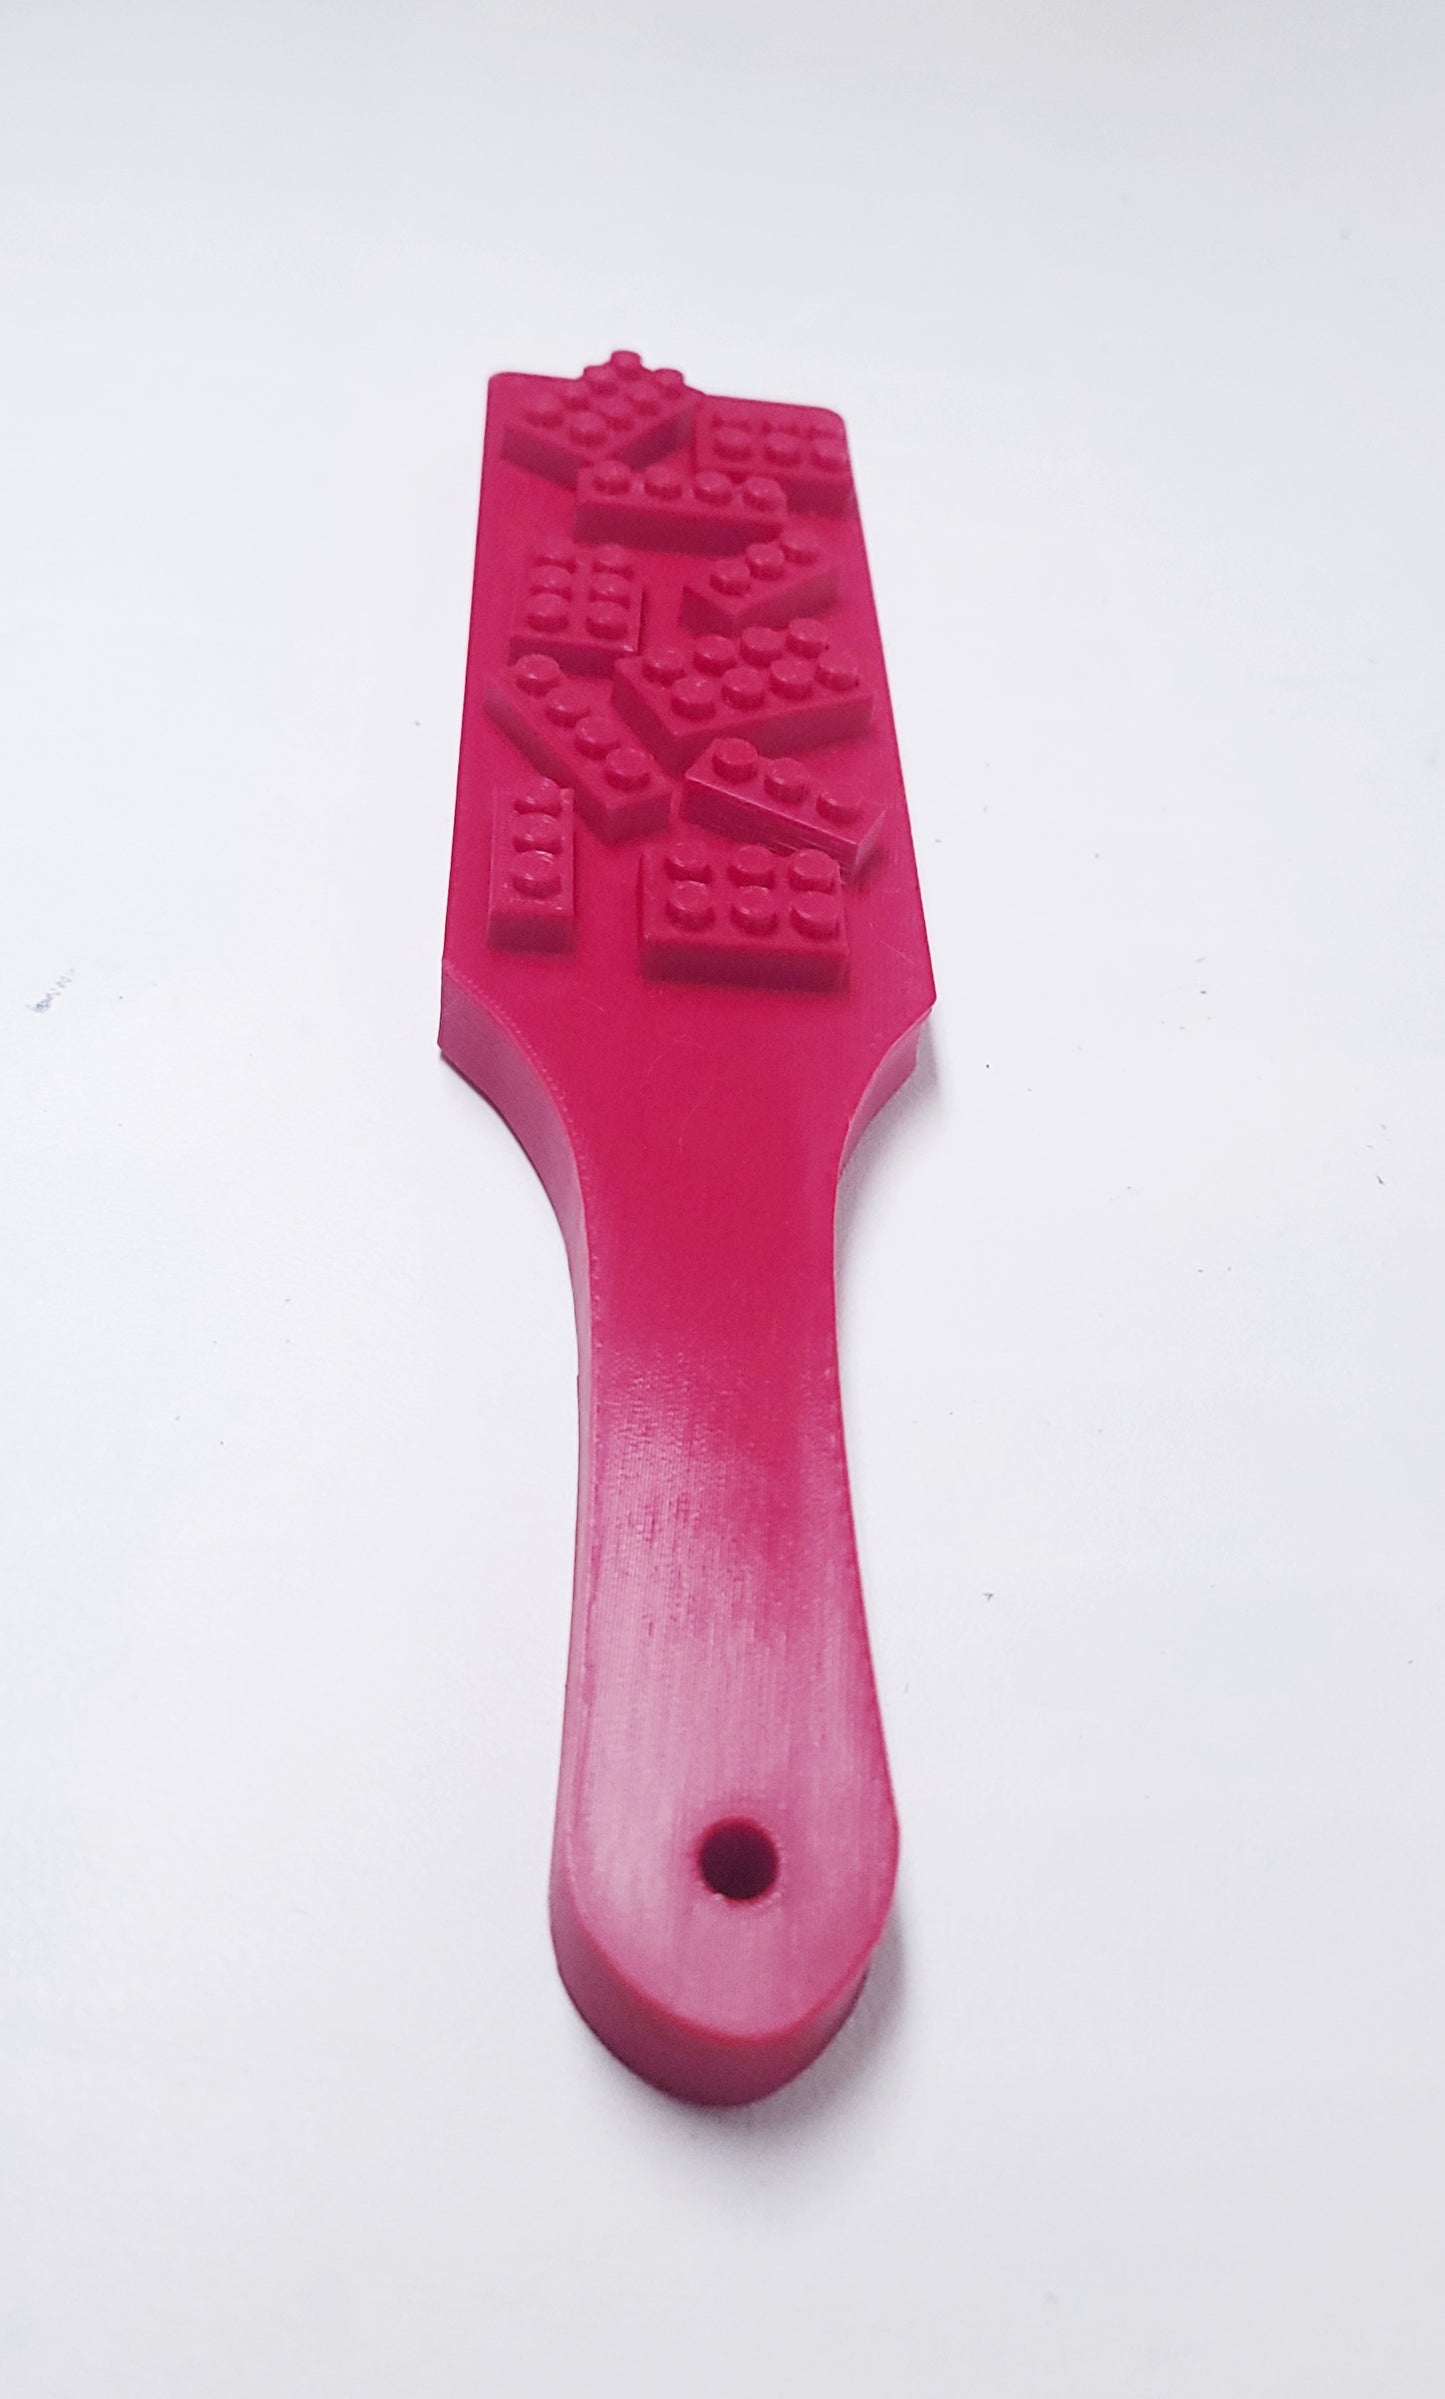 'Lego' Paddle in Red- Made to Order